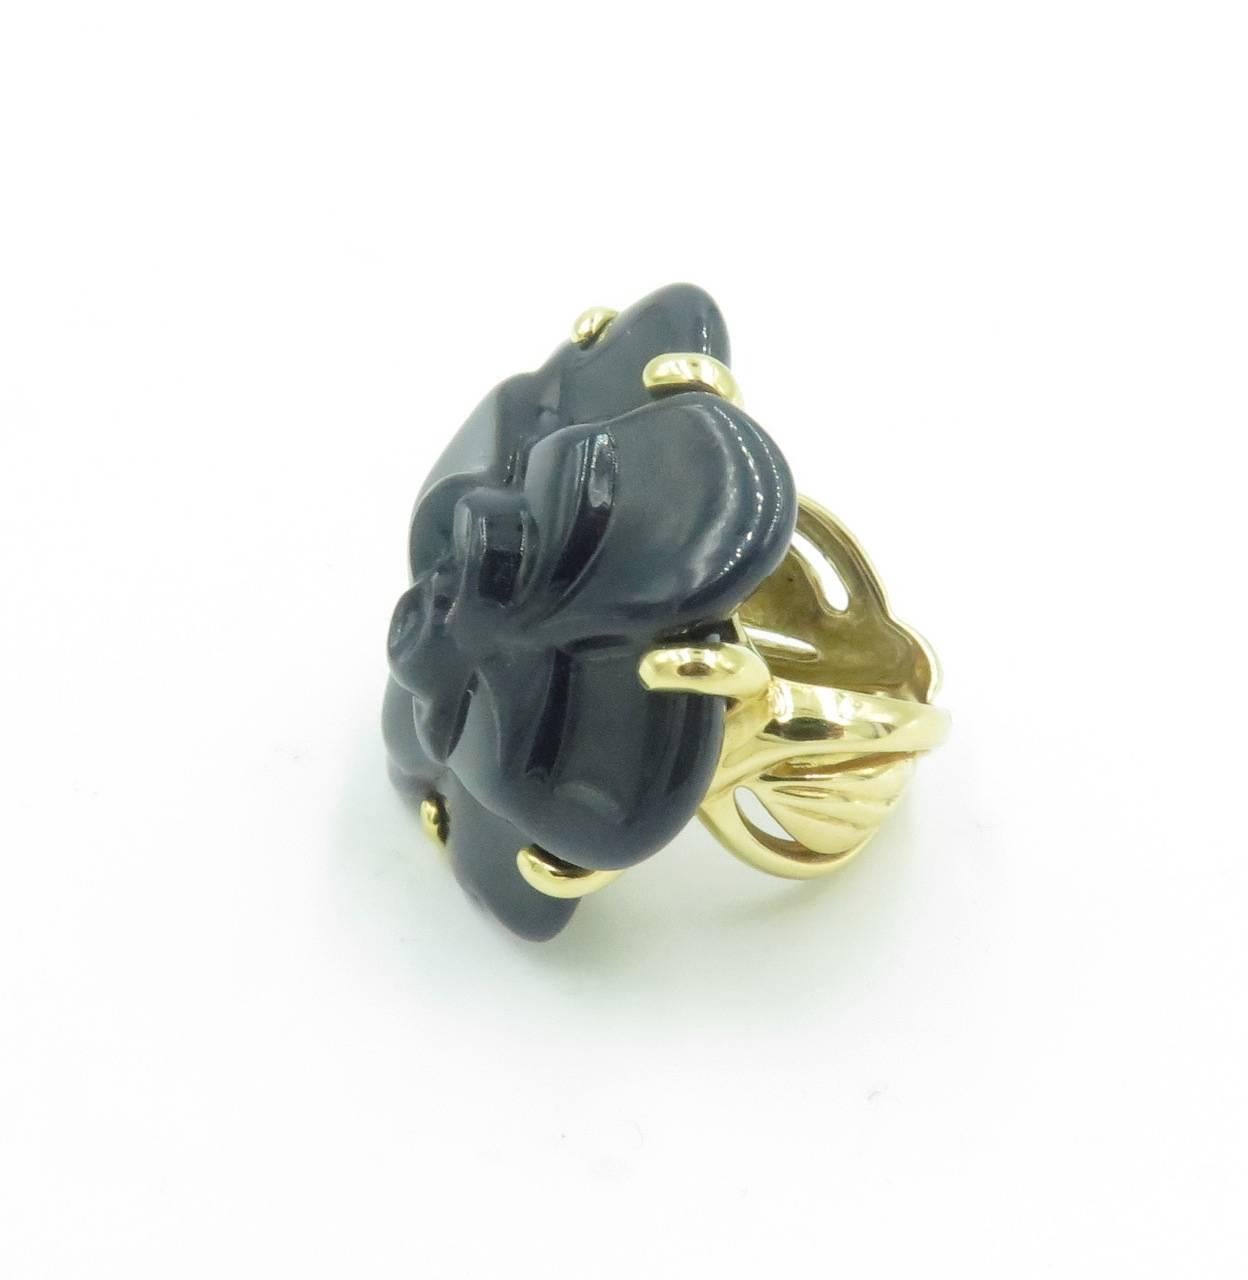 An 18 karat yellow gold and onyx medium size Camelia ring. Chanel. French. Circa 2000. Set with a carved onyx flowered, with undulating twisted gold shank. Size 4 1/2. Gross weight is approximately 19.2 grams. Stamped Chanel, 750, with French assay